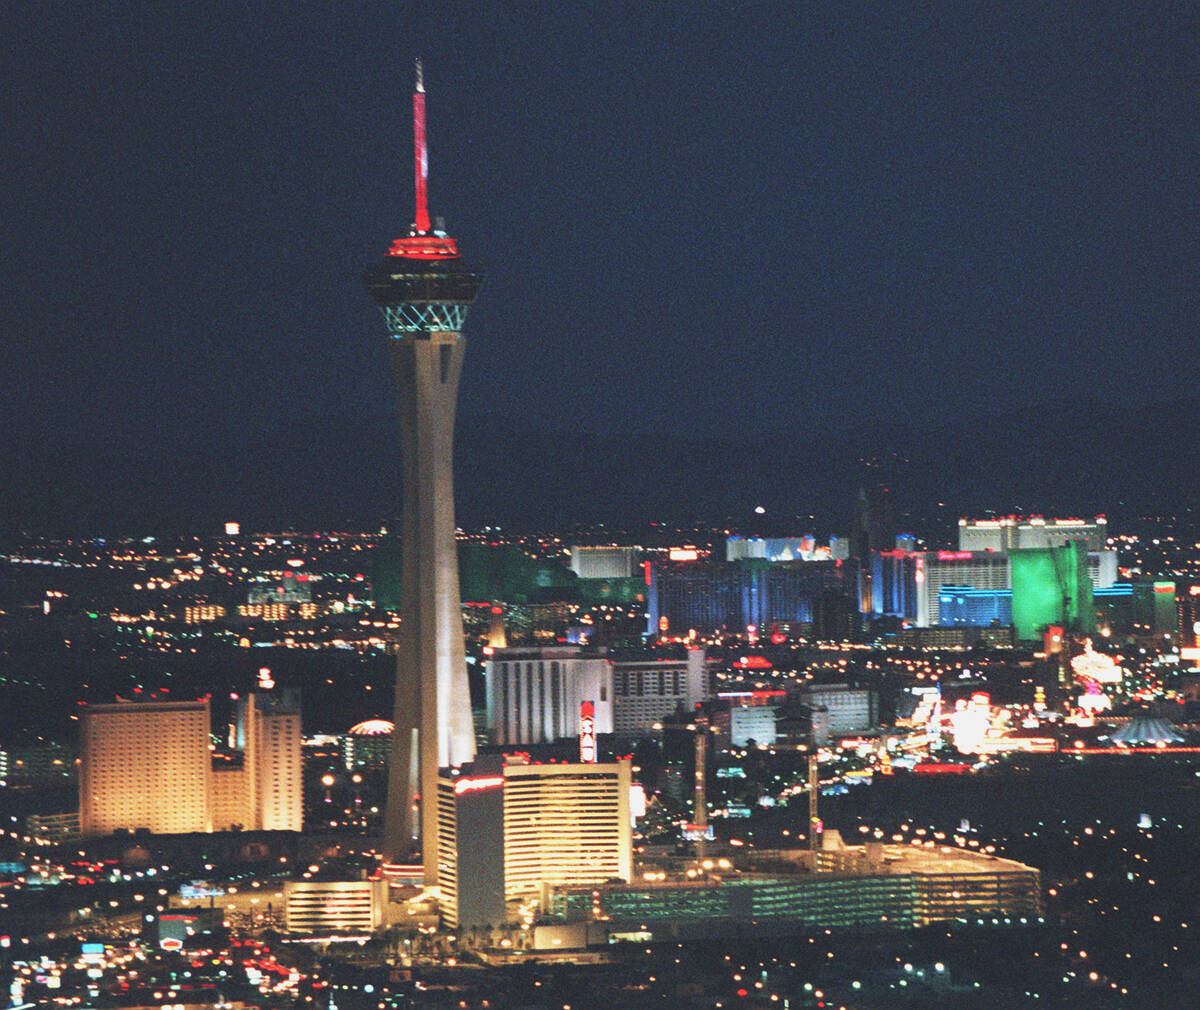 The Stratosphere Tower with the Las Vegas Strip in 1996. (Las Vegas Review-Journal/File)